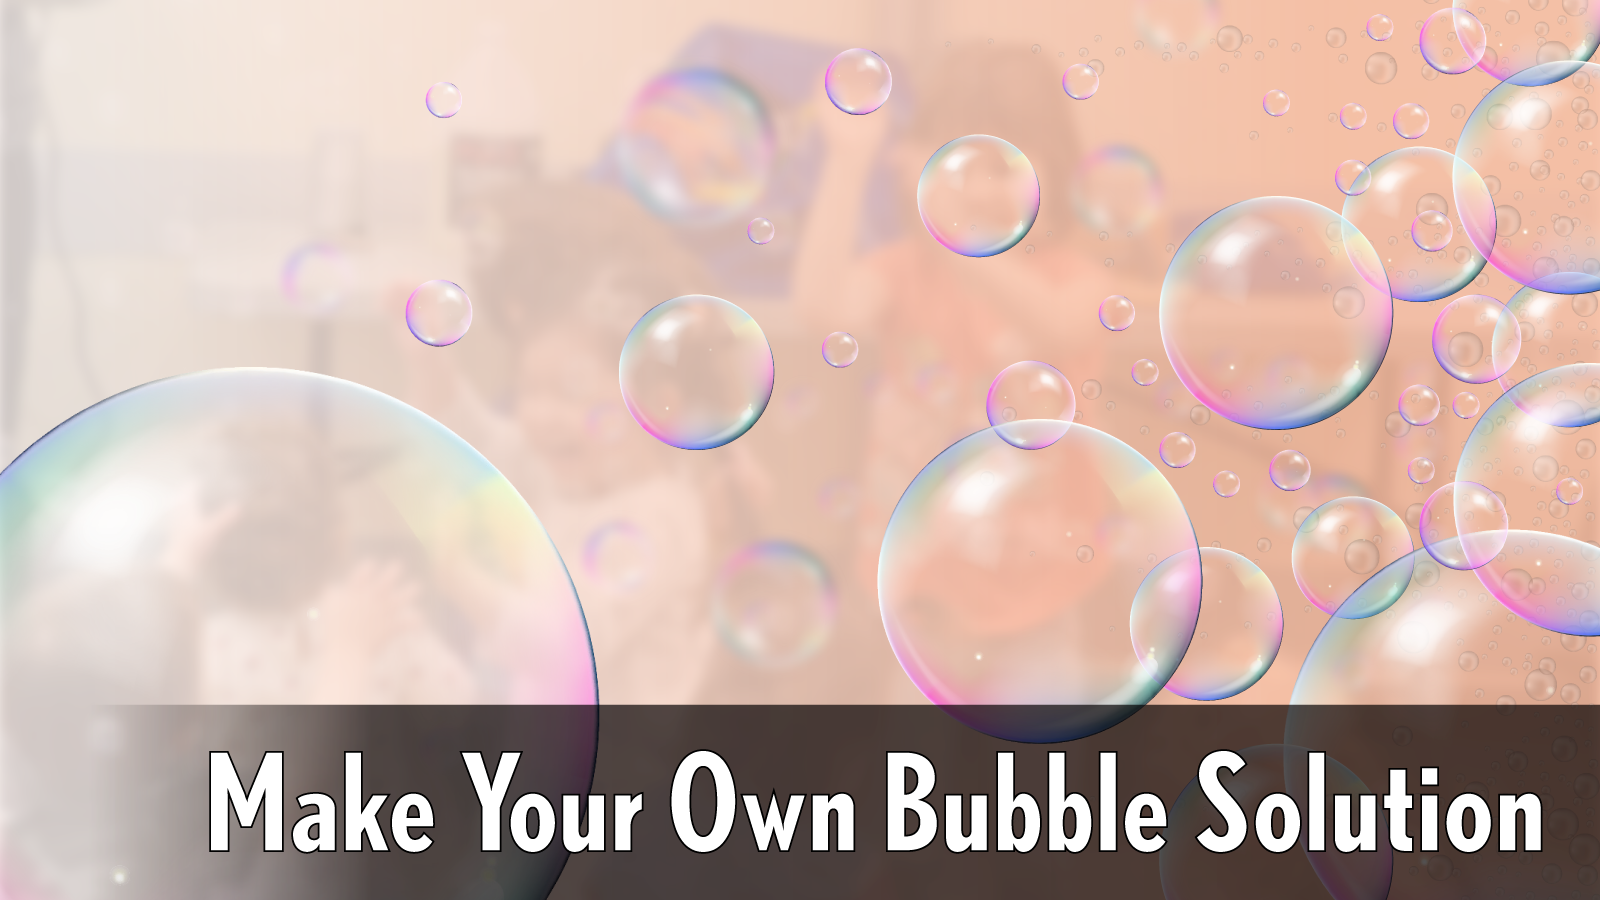 Make Your Own Bubble Solution Header Image